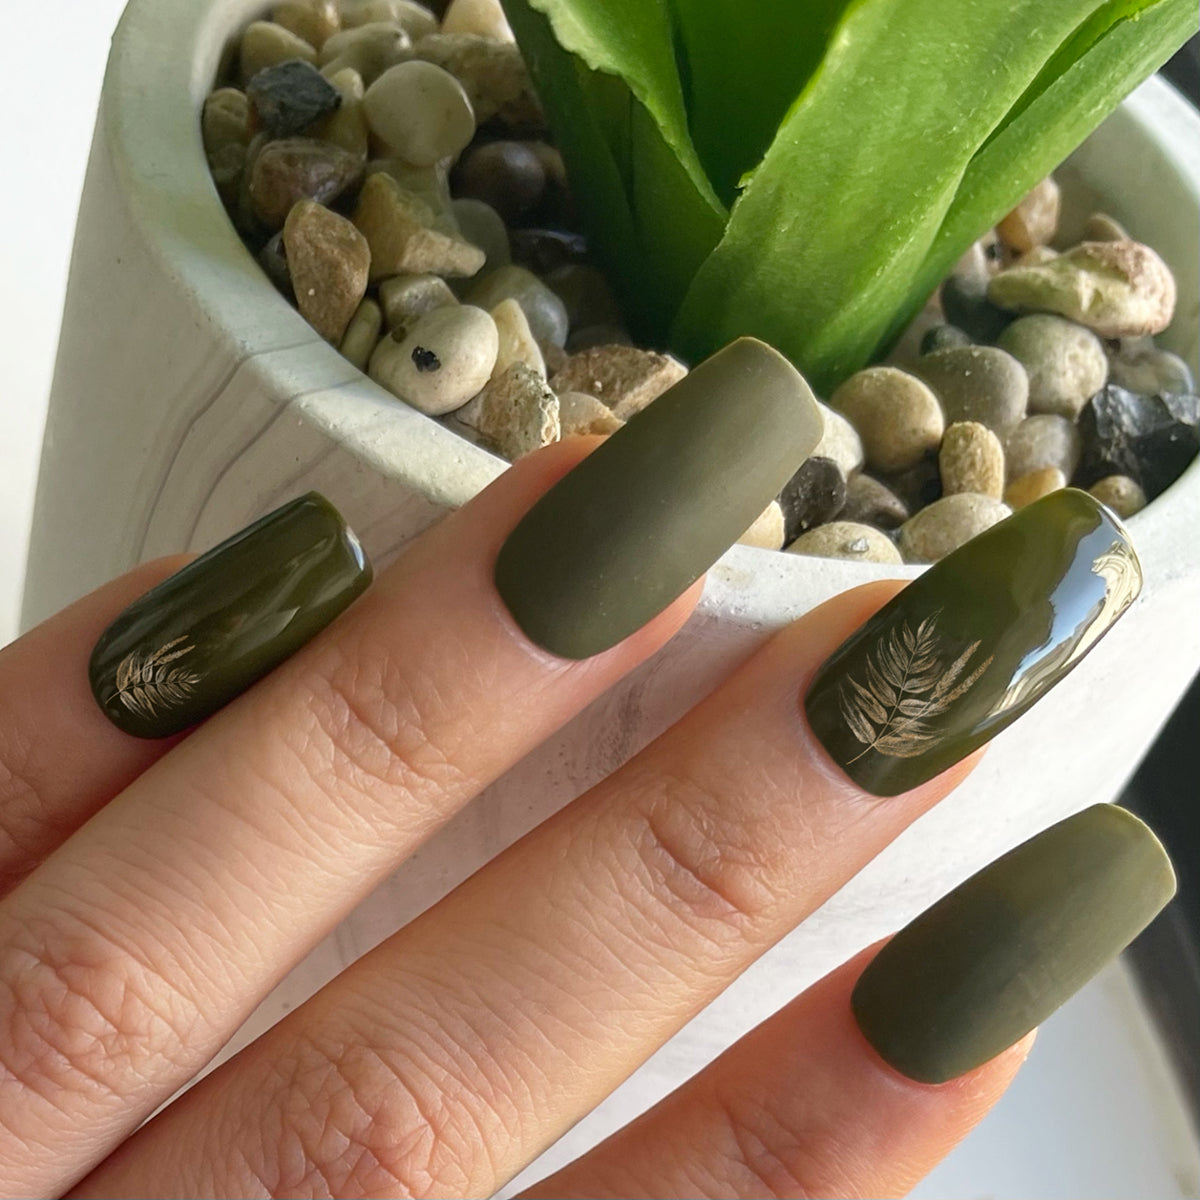 Army or camouflage nails 💅🏻 by Heartyournails